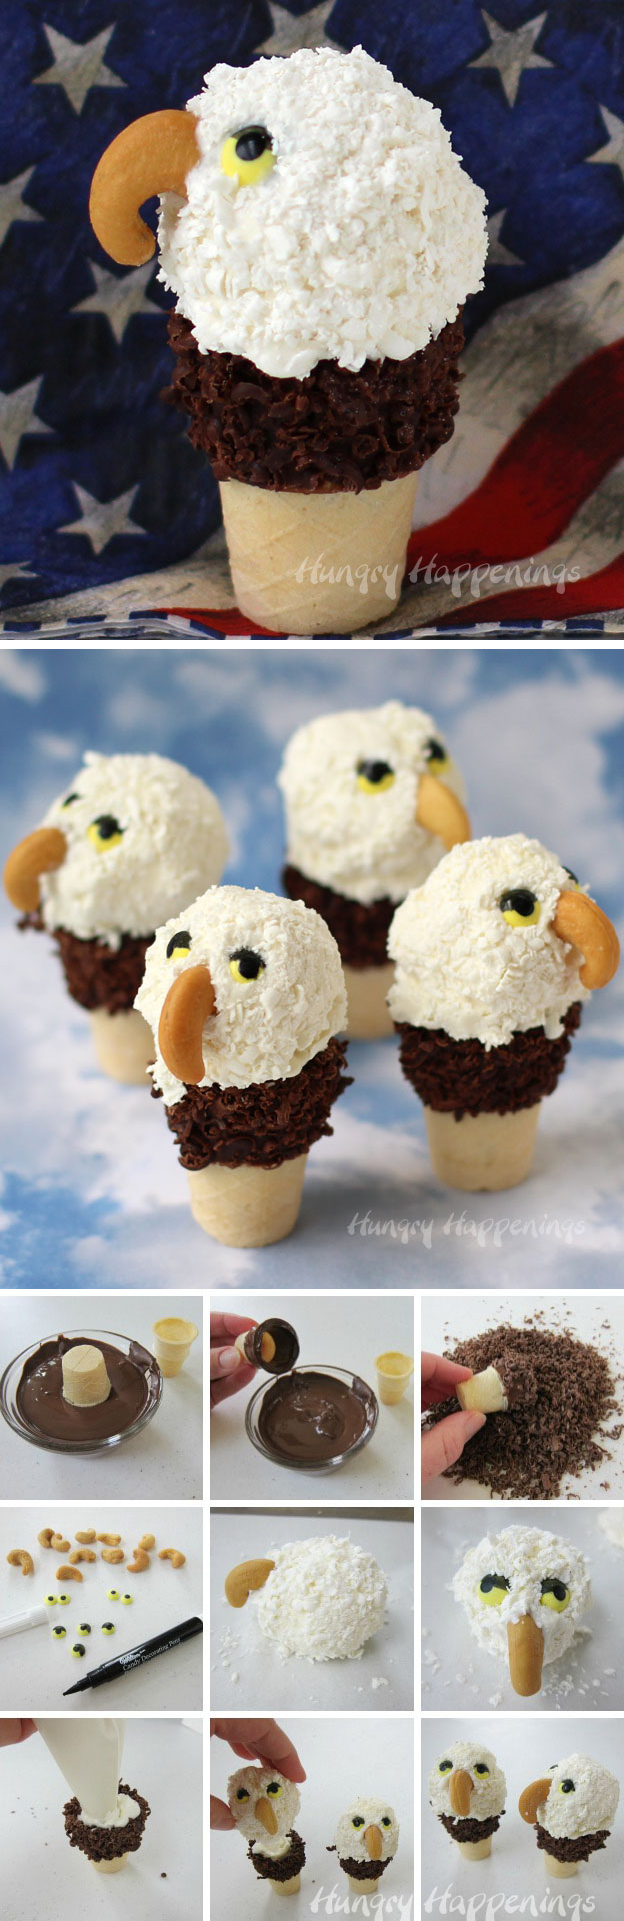 Create your own awe inspiring eagles for your July 4th celebrations. These Mini Ice Cream Cone Eagles coated in shredded Candy Melts are sure to be the hit of your patriotic party.